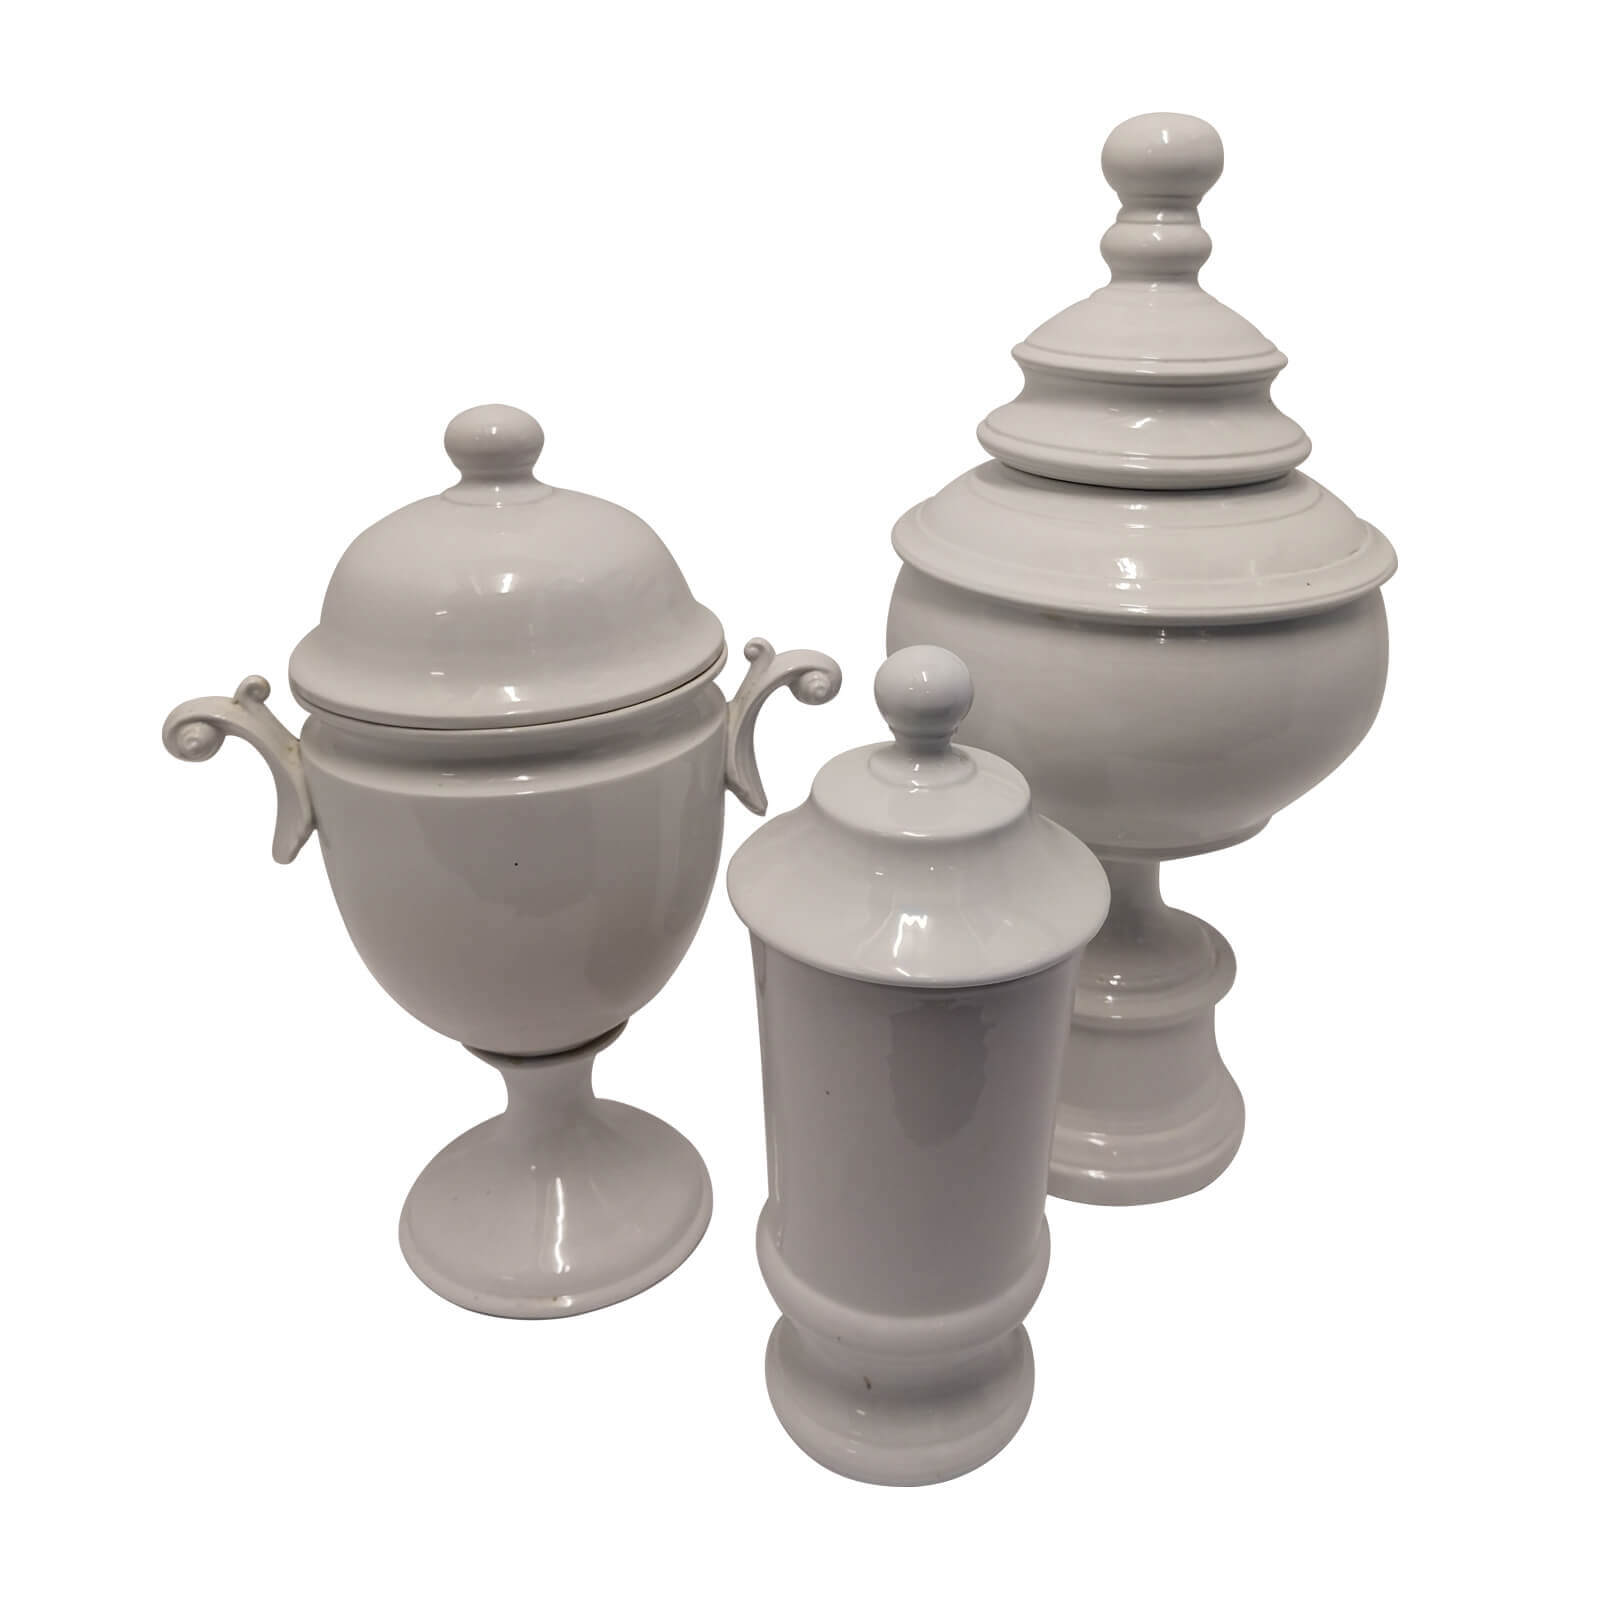 Collection of Lidded White Ceramic Vessels